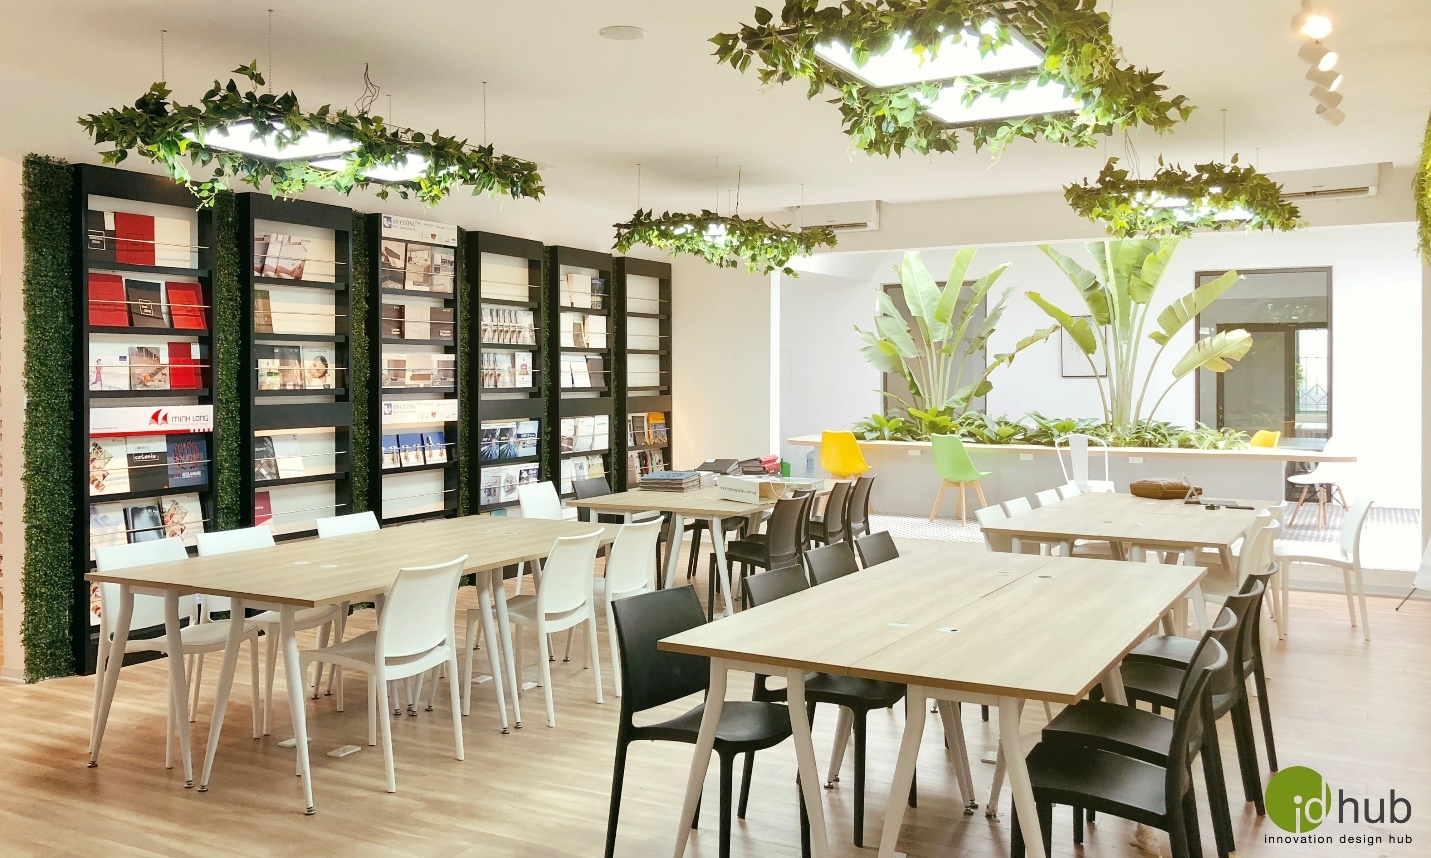 idhub co working space opens exclusively for designer community